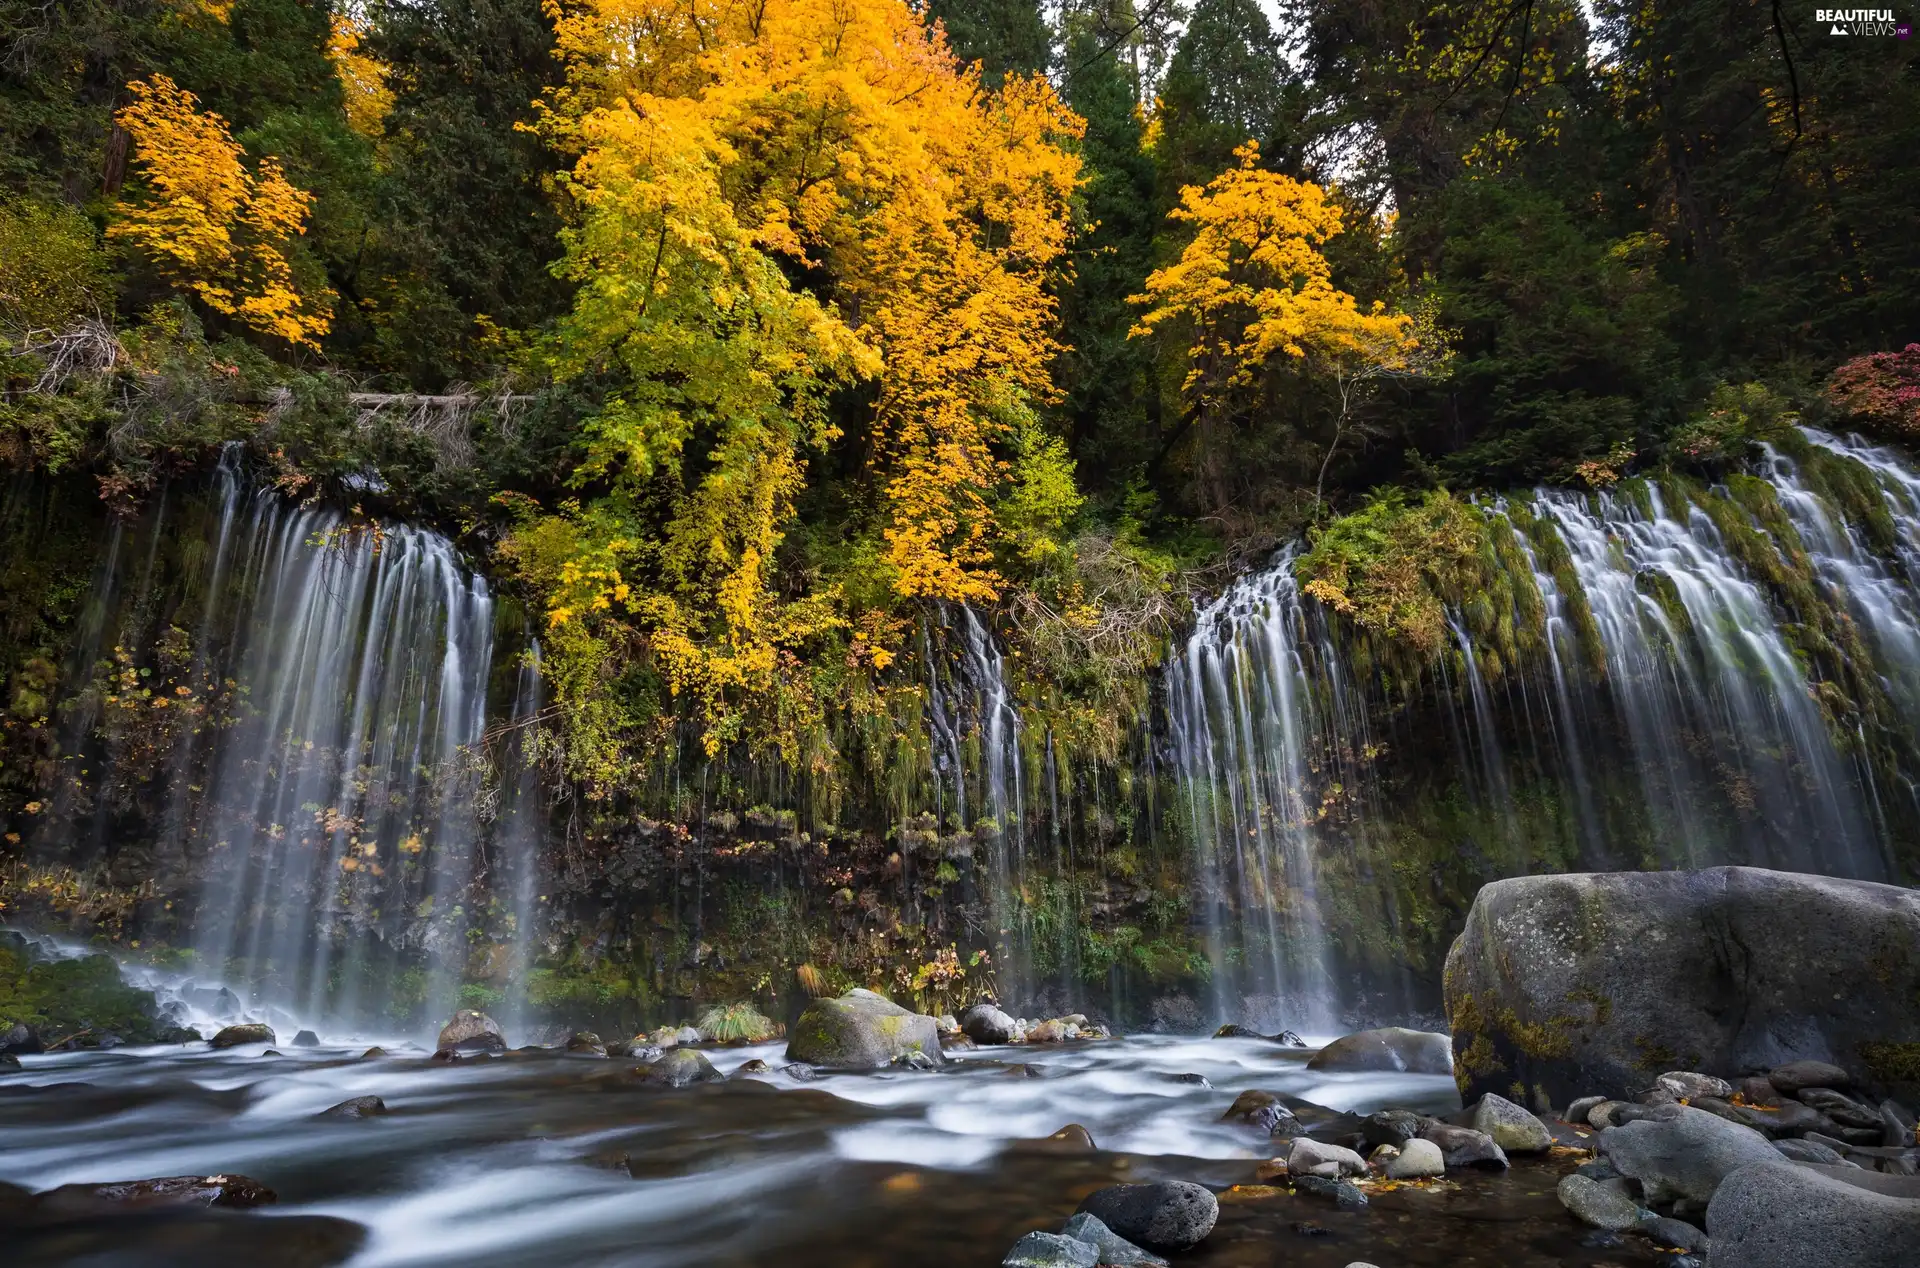 trees, Mossbrae Falls, viewes, River, State of California, The United States, autumn, Siskiyou County, Stones